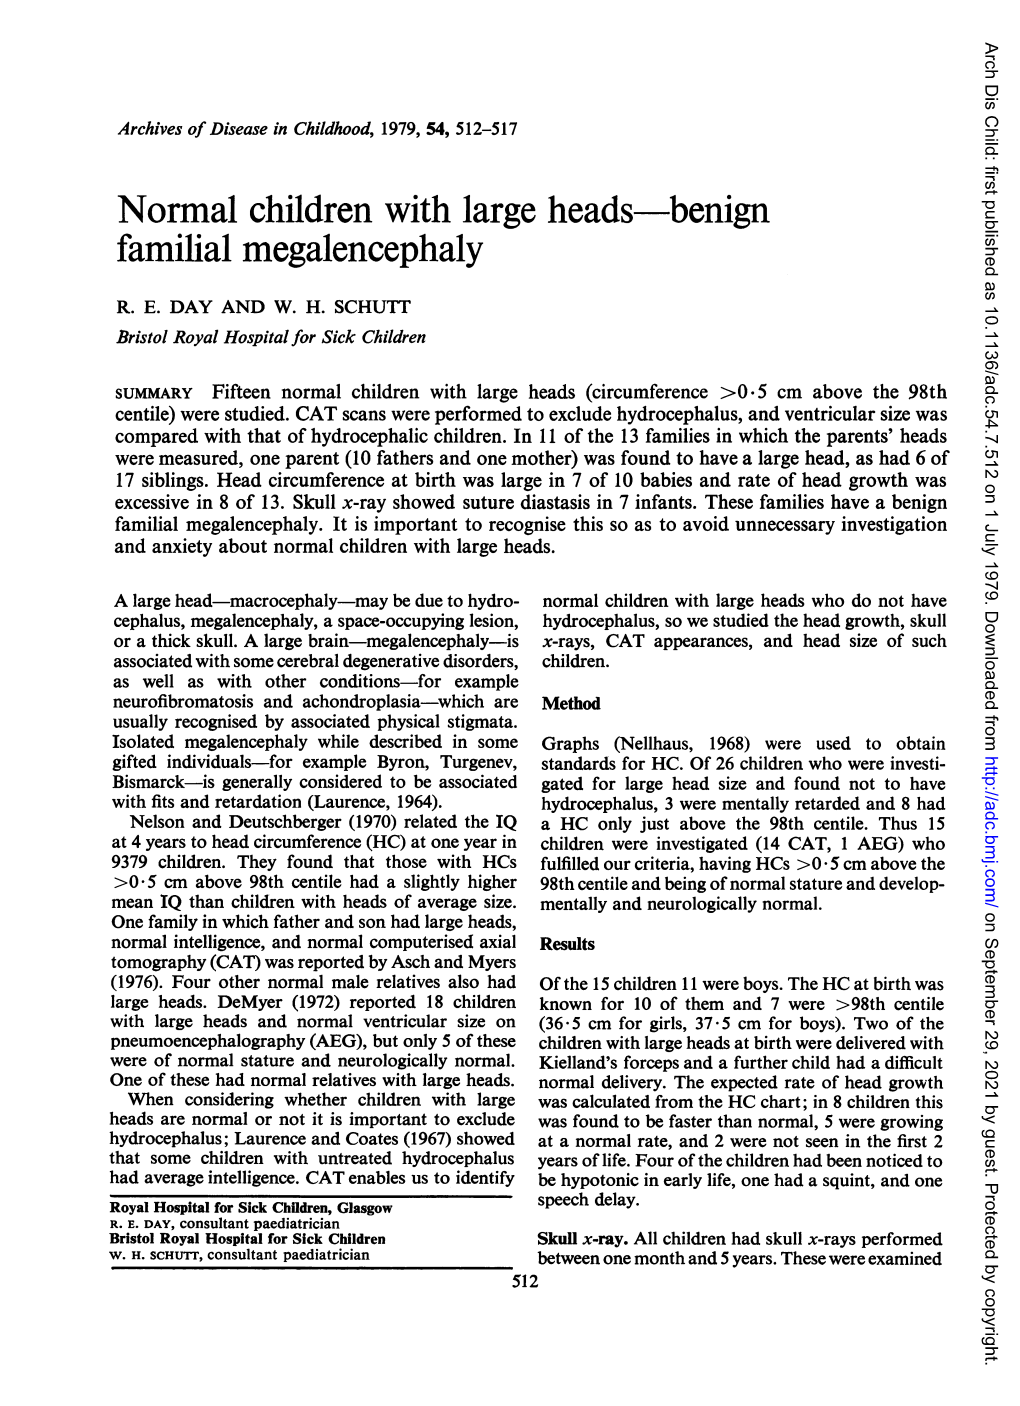 Normal Children with Large Heads-Benign Familial Megalencephaly